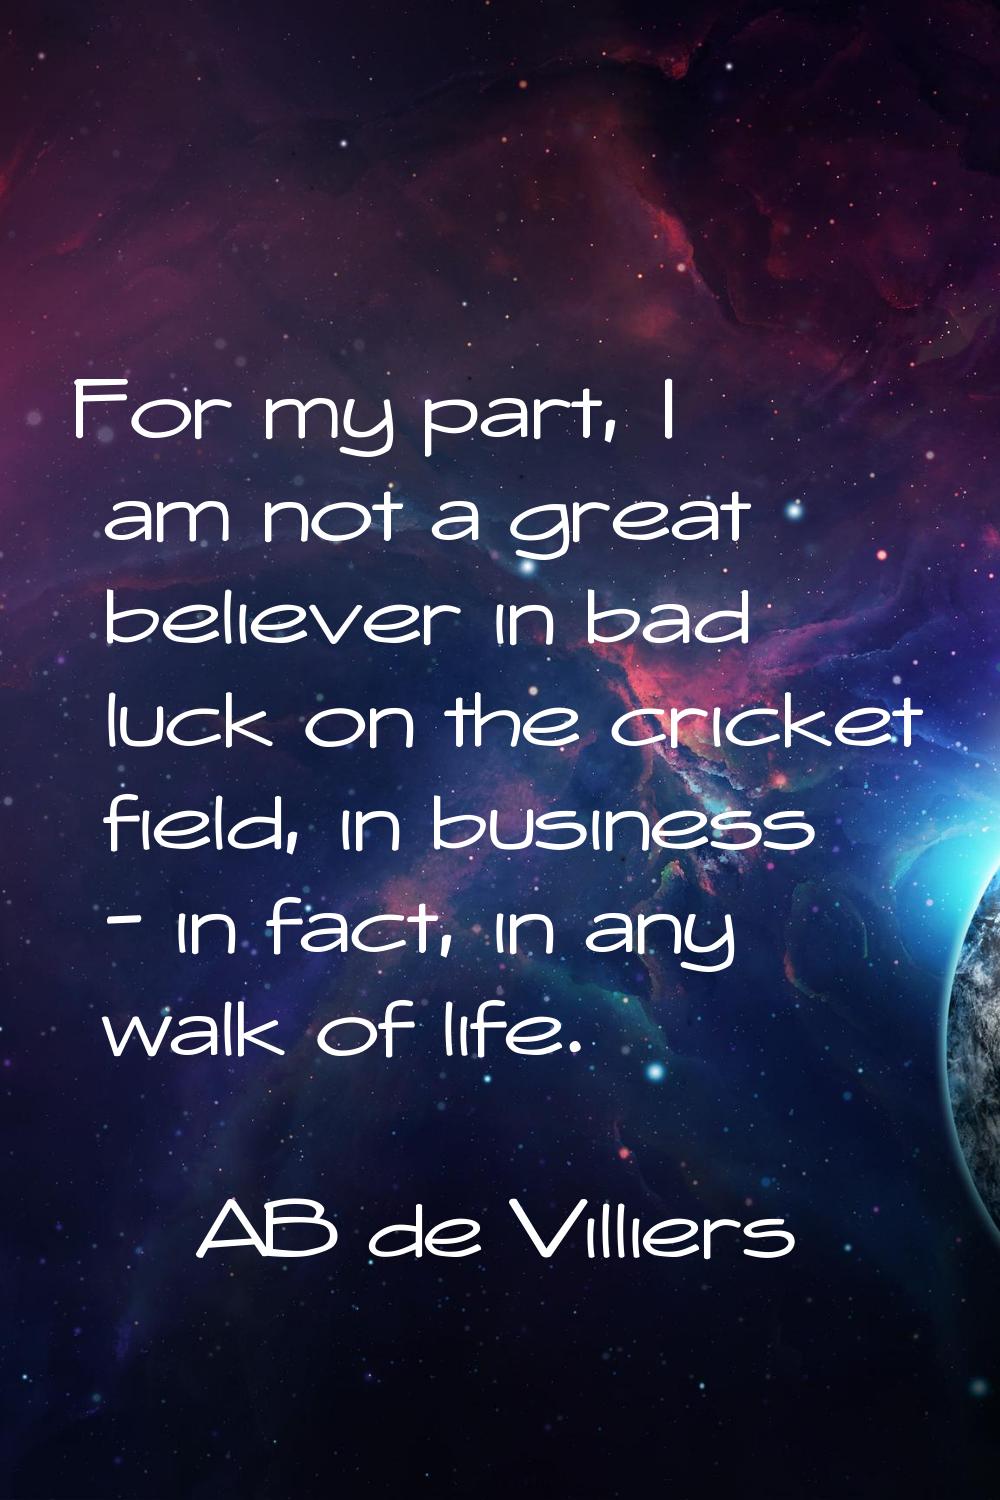 For my part, I am not a great believer in bad luck on the cricket field, in business - in fact, in 